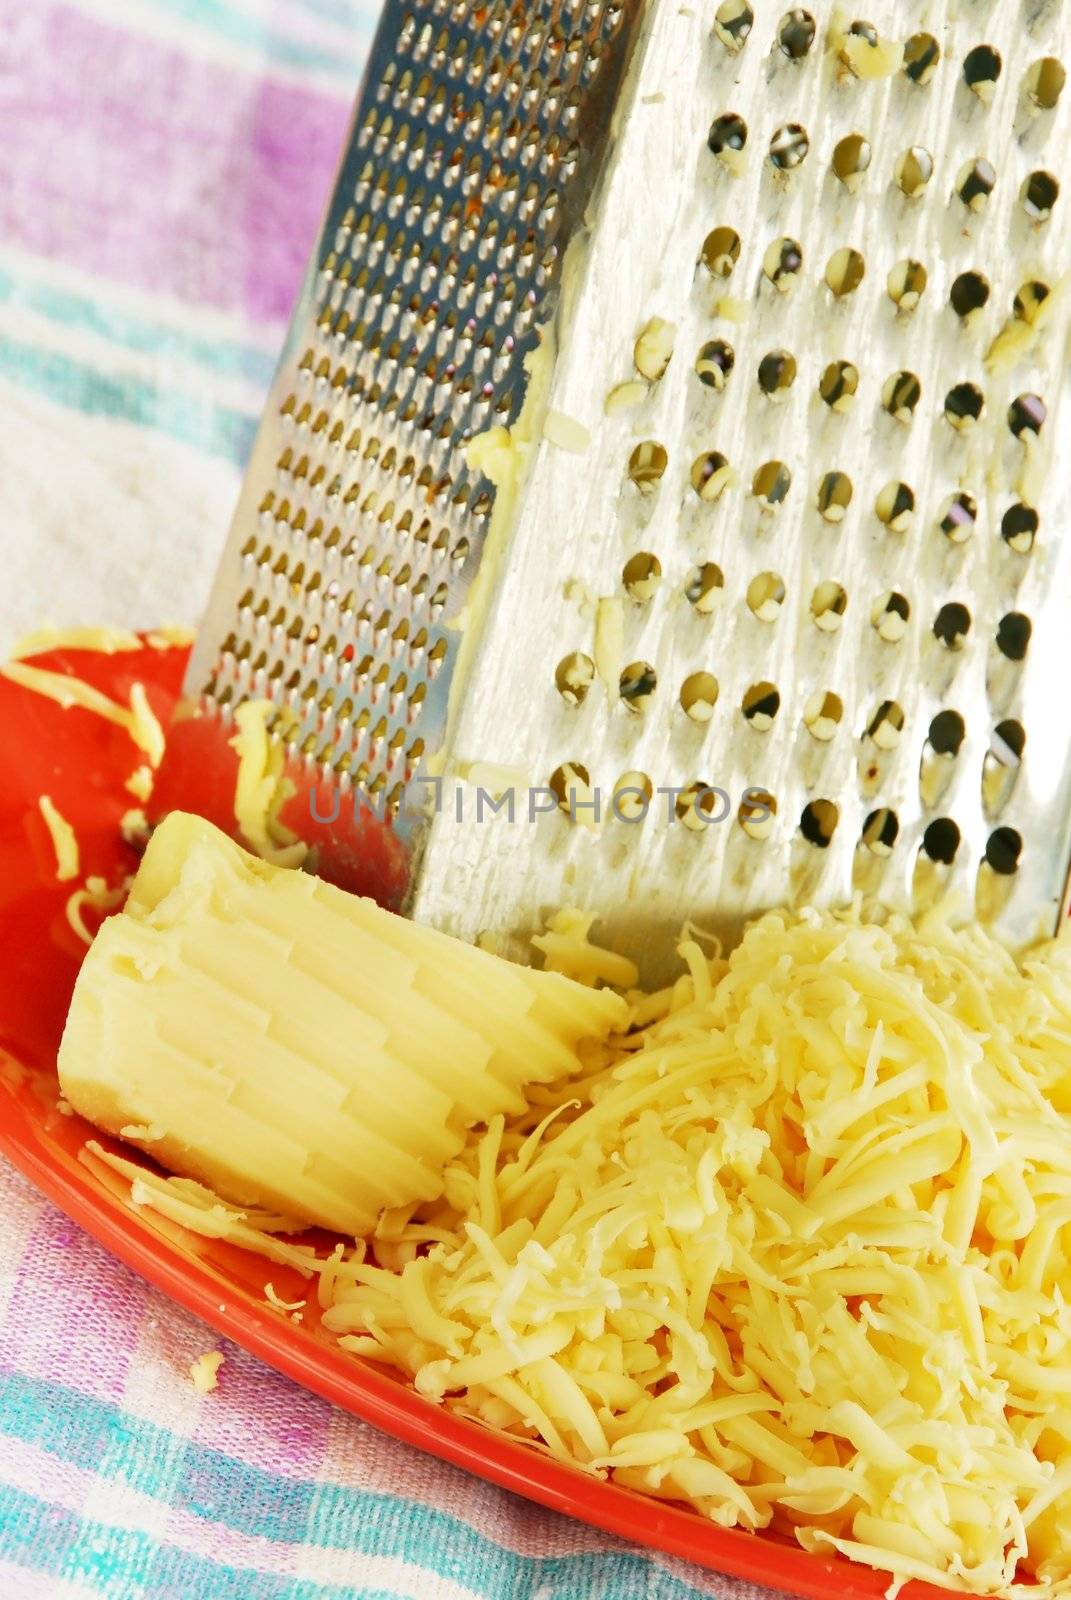 Grated cheese by simply